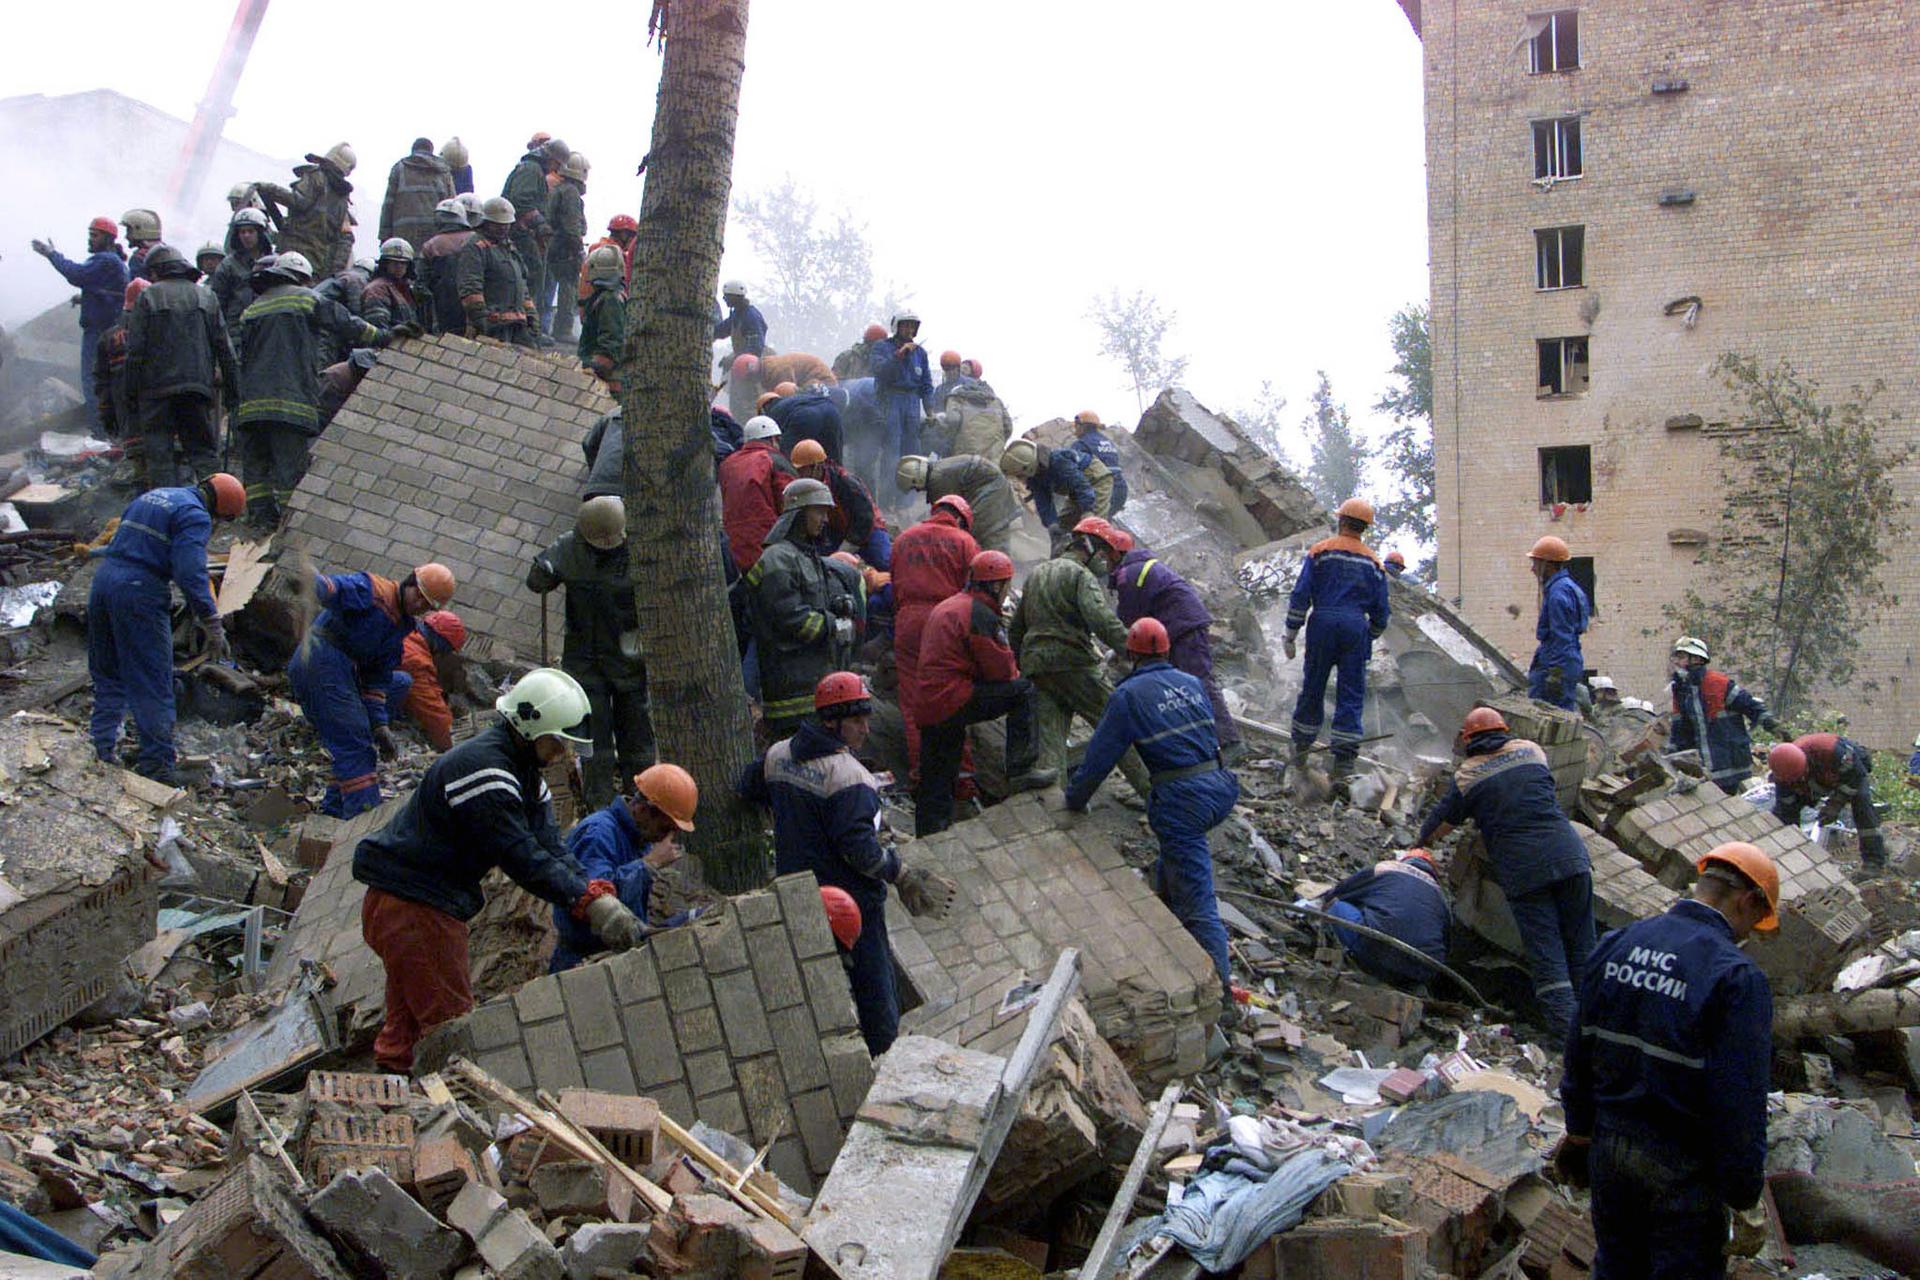 A crowd of people wearing hard hats shift through the rubble of a building